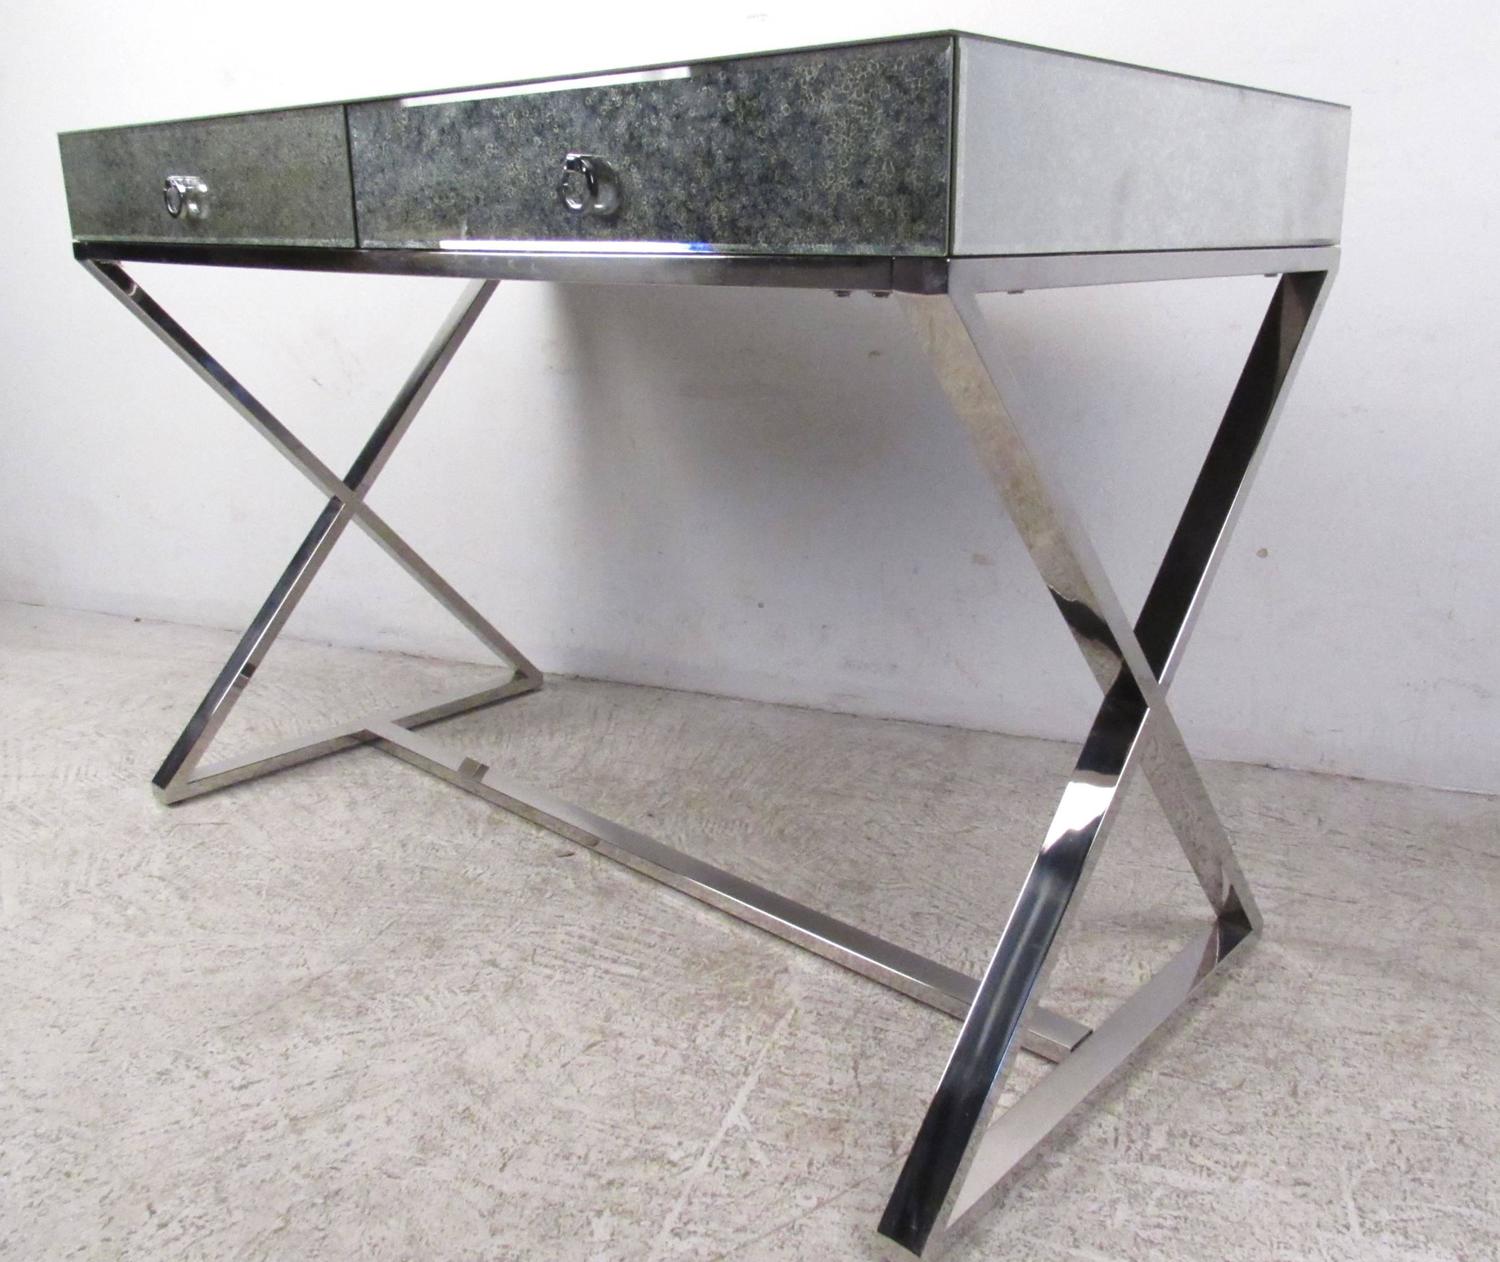 MidCentury Style Glass Top Writing Desk For Sale at 1stdibs